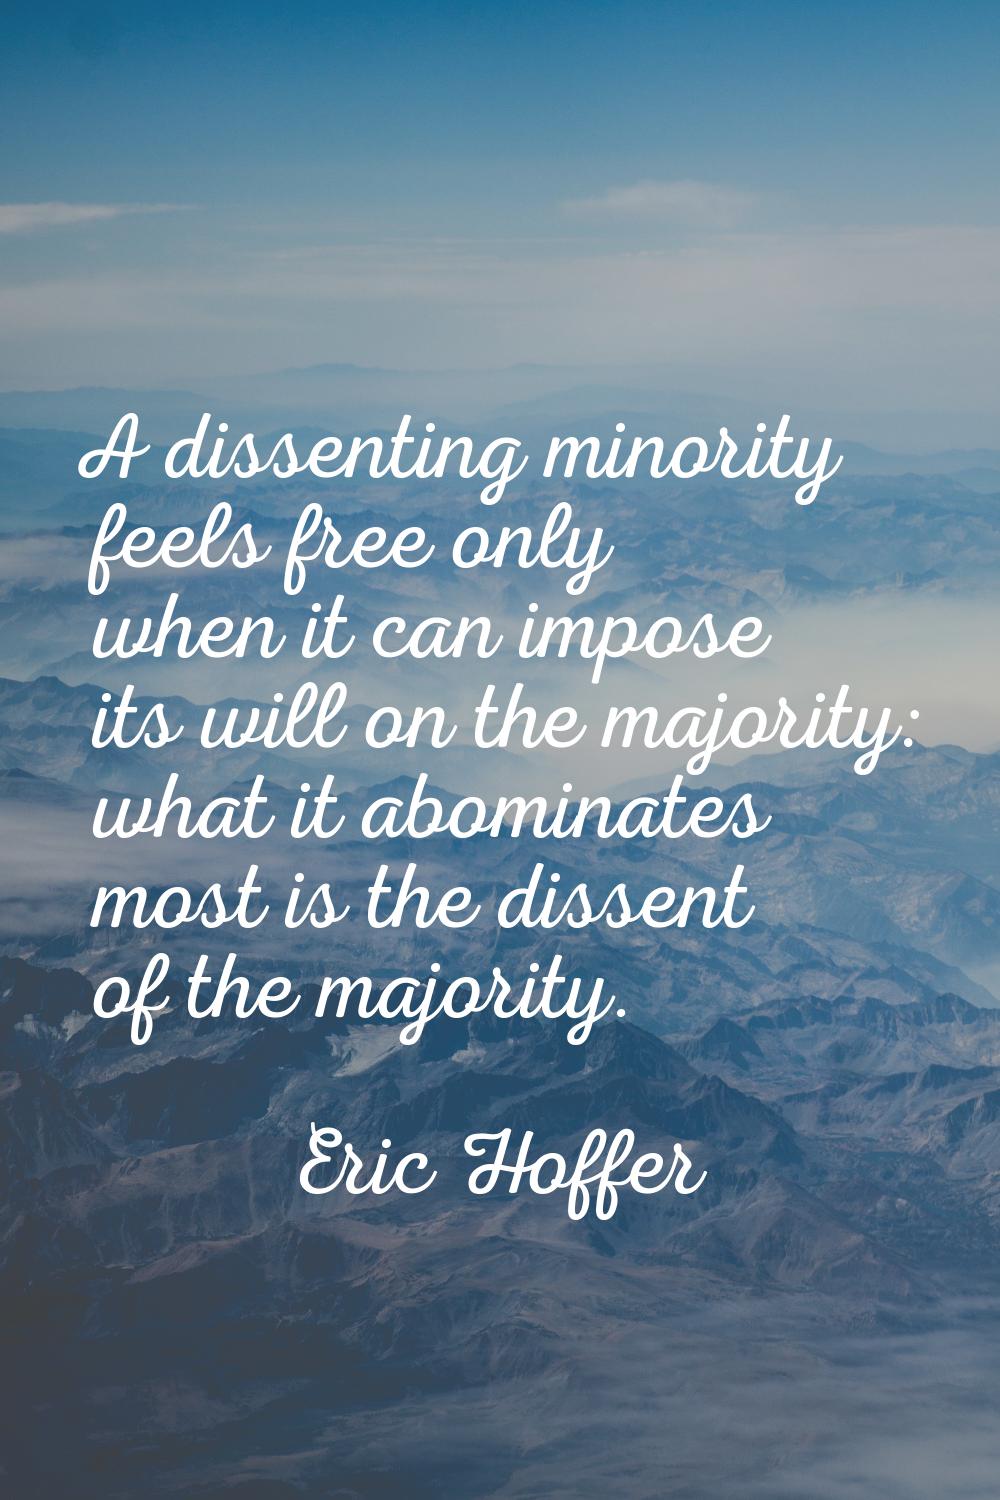 A dissenting minority feels free only when it can impose its will on the majority: what it abominat